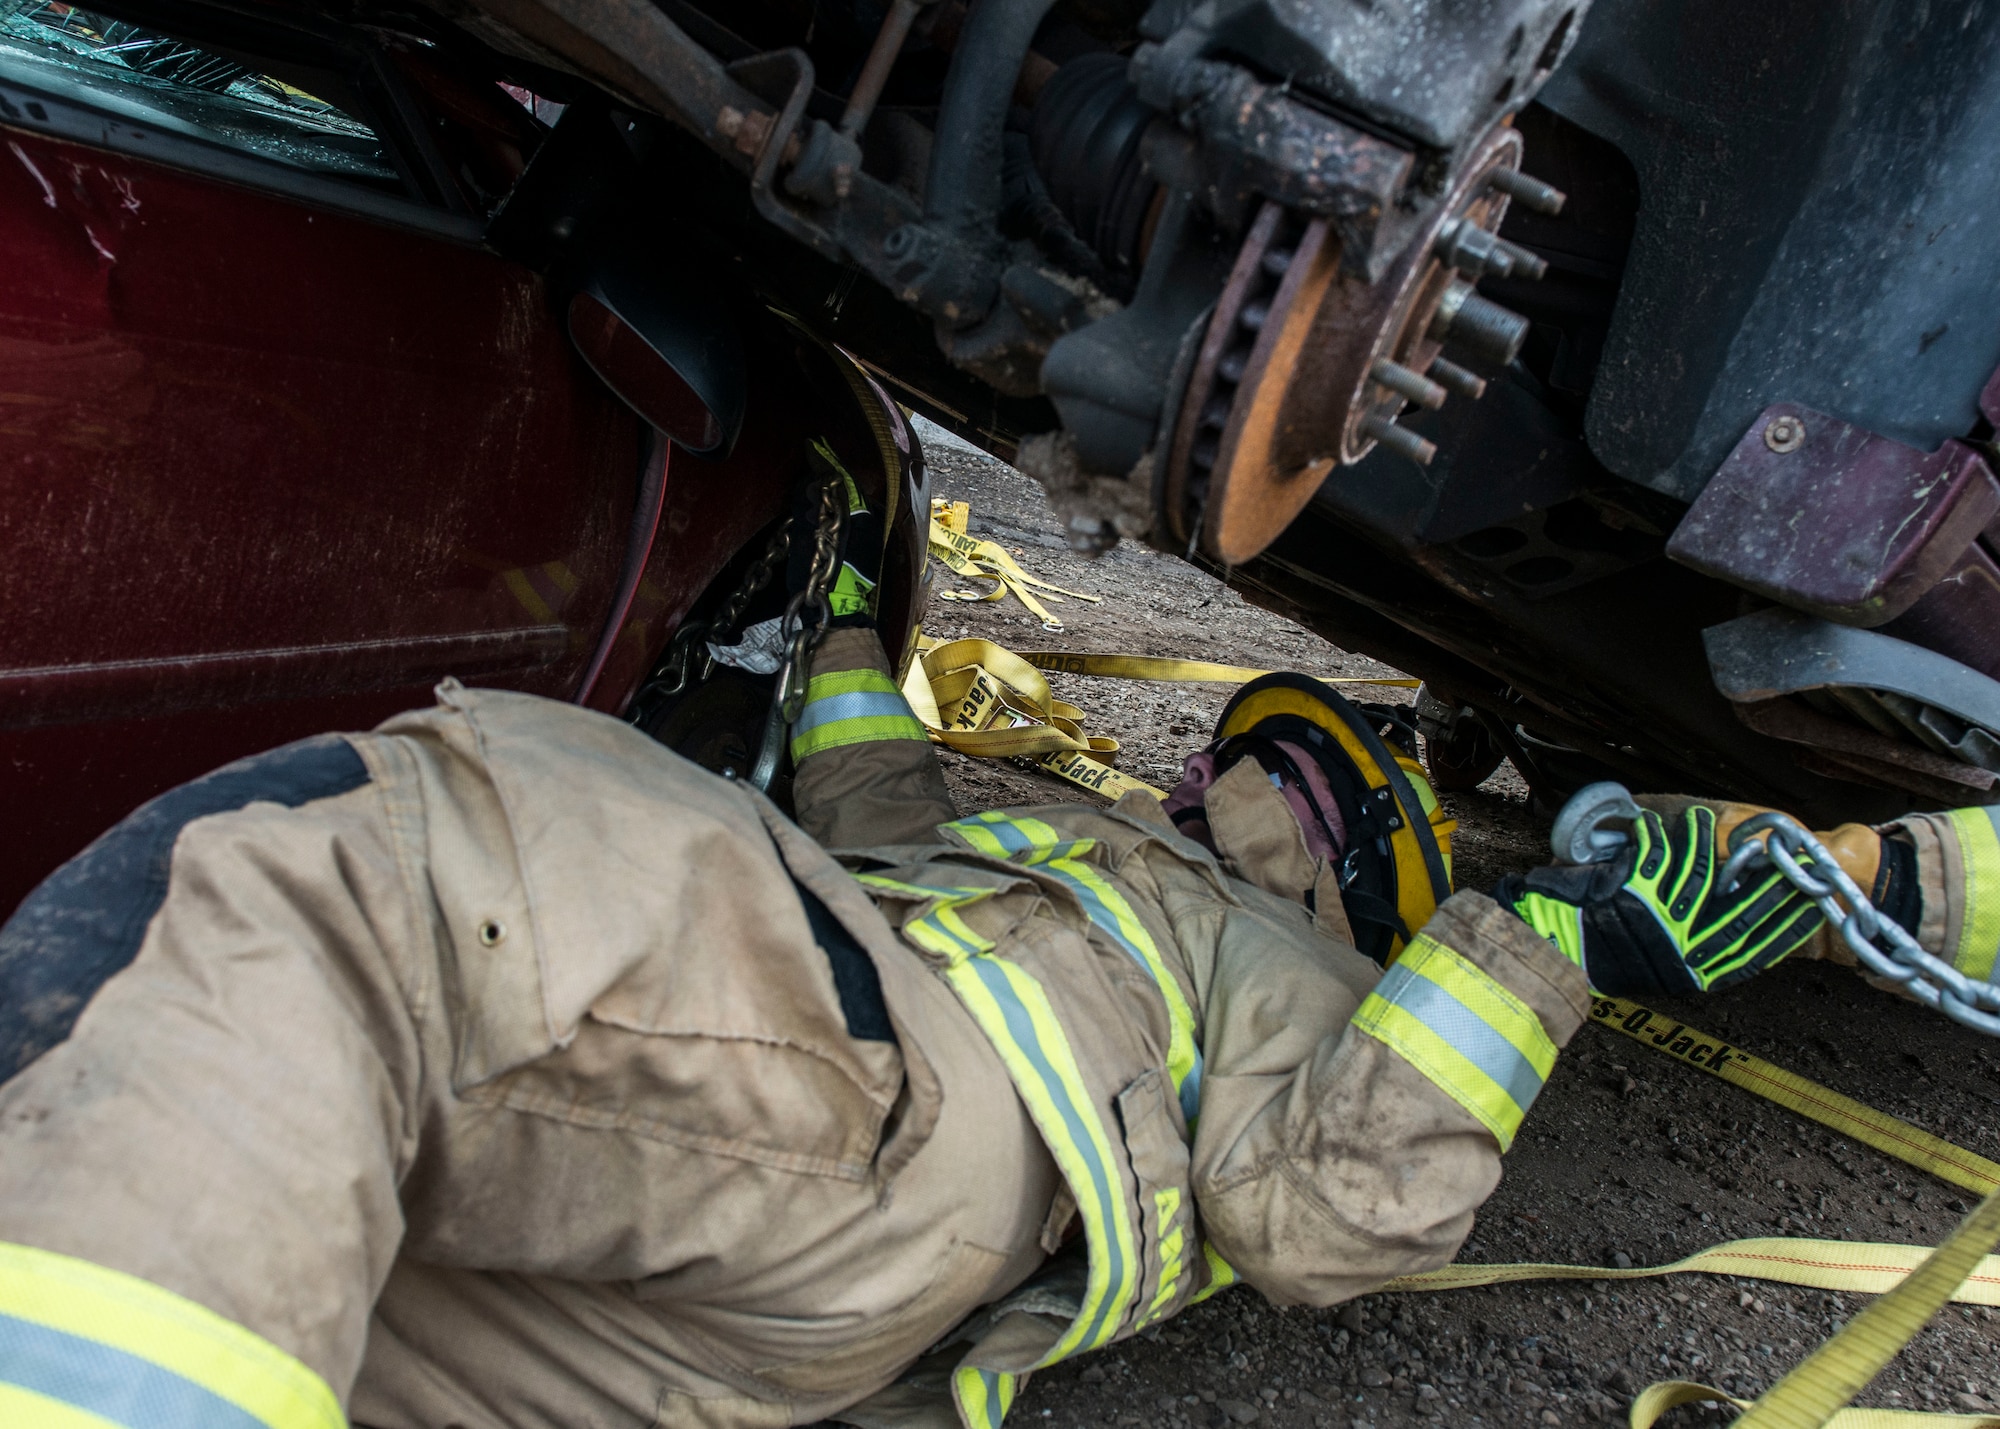 A firefighter assigned to the 103rd Civil Engineer Squadron, Connecticut Air National Guard attempts to remove a vehicle off of another vehicle as part of an auto accident scenario during a rescue strike team exercise, June 1, 2019 in East Granby, Conn. The firefighters trained with members of several local fire departments to ensure continuity in training across departments. (U.S. Air National Guard photo by Tech. Sgt. Tamara R. Dabney)